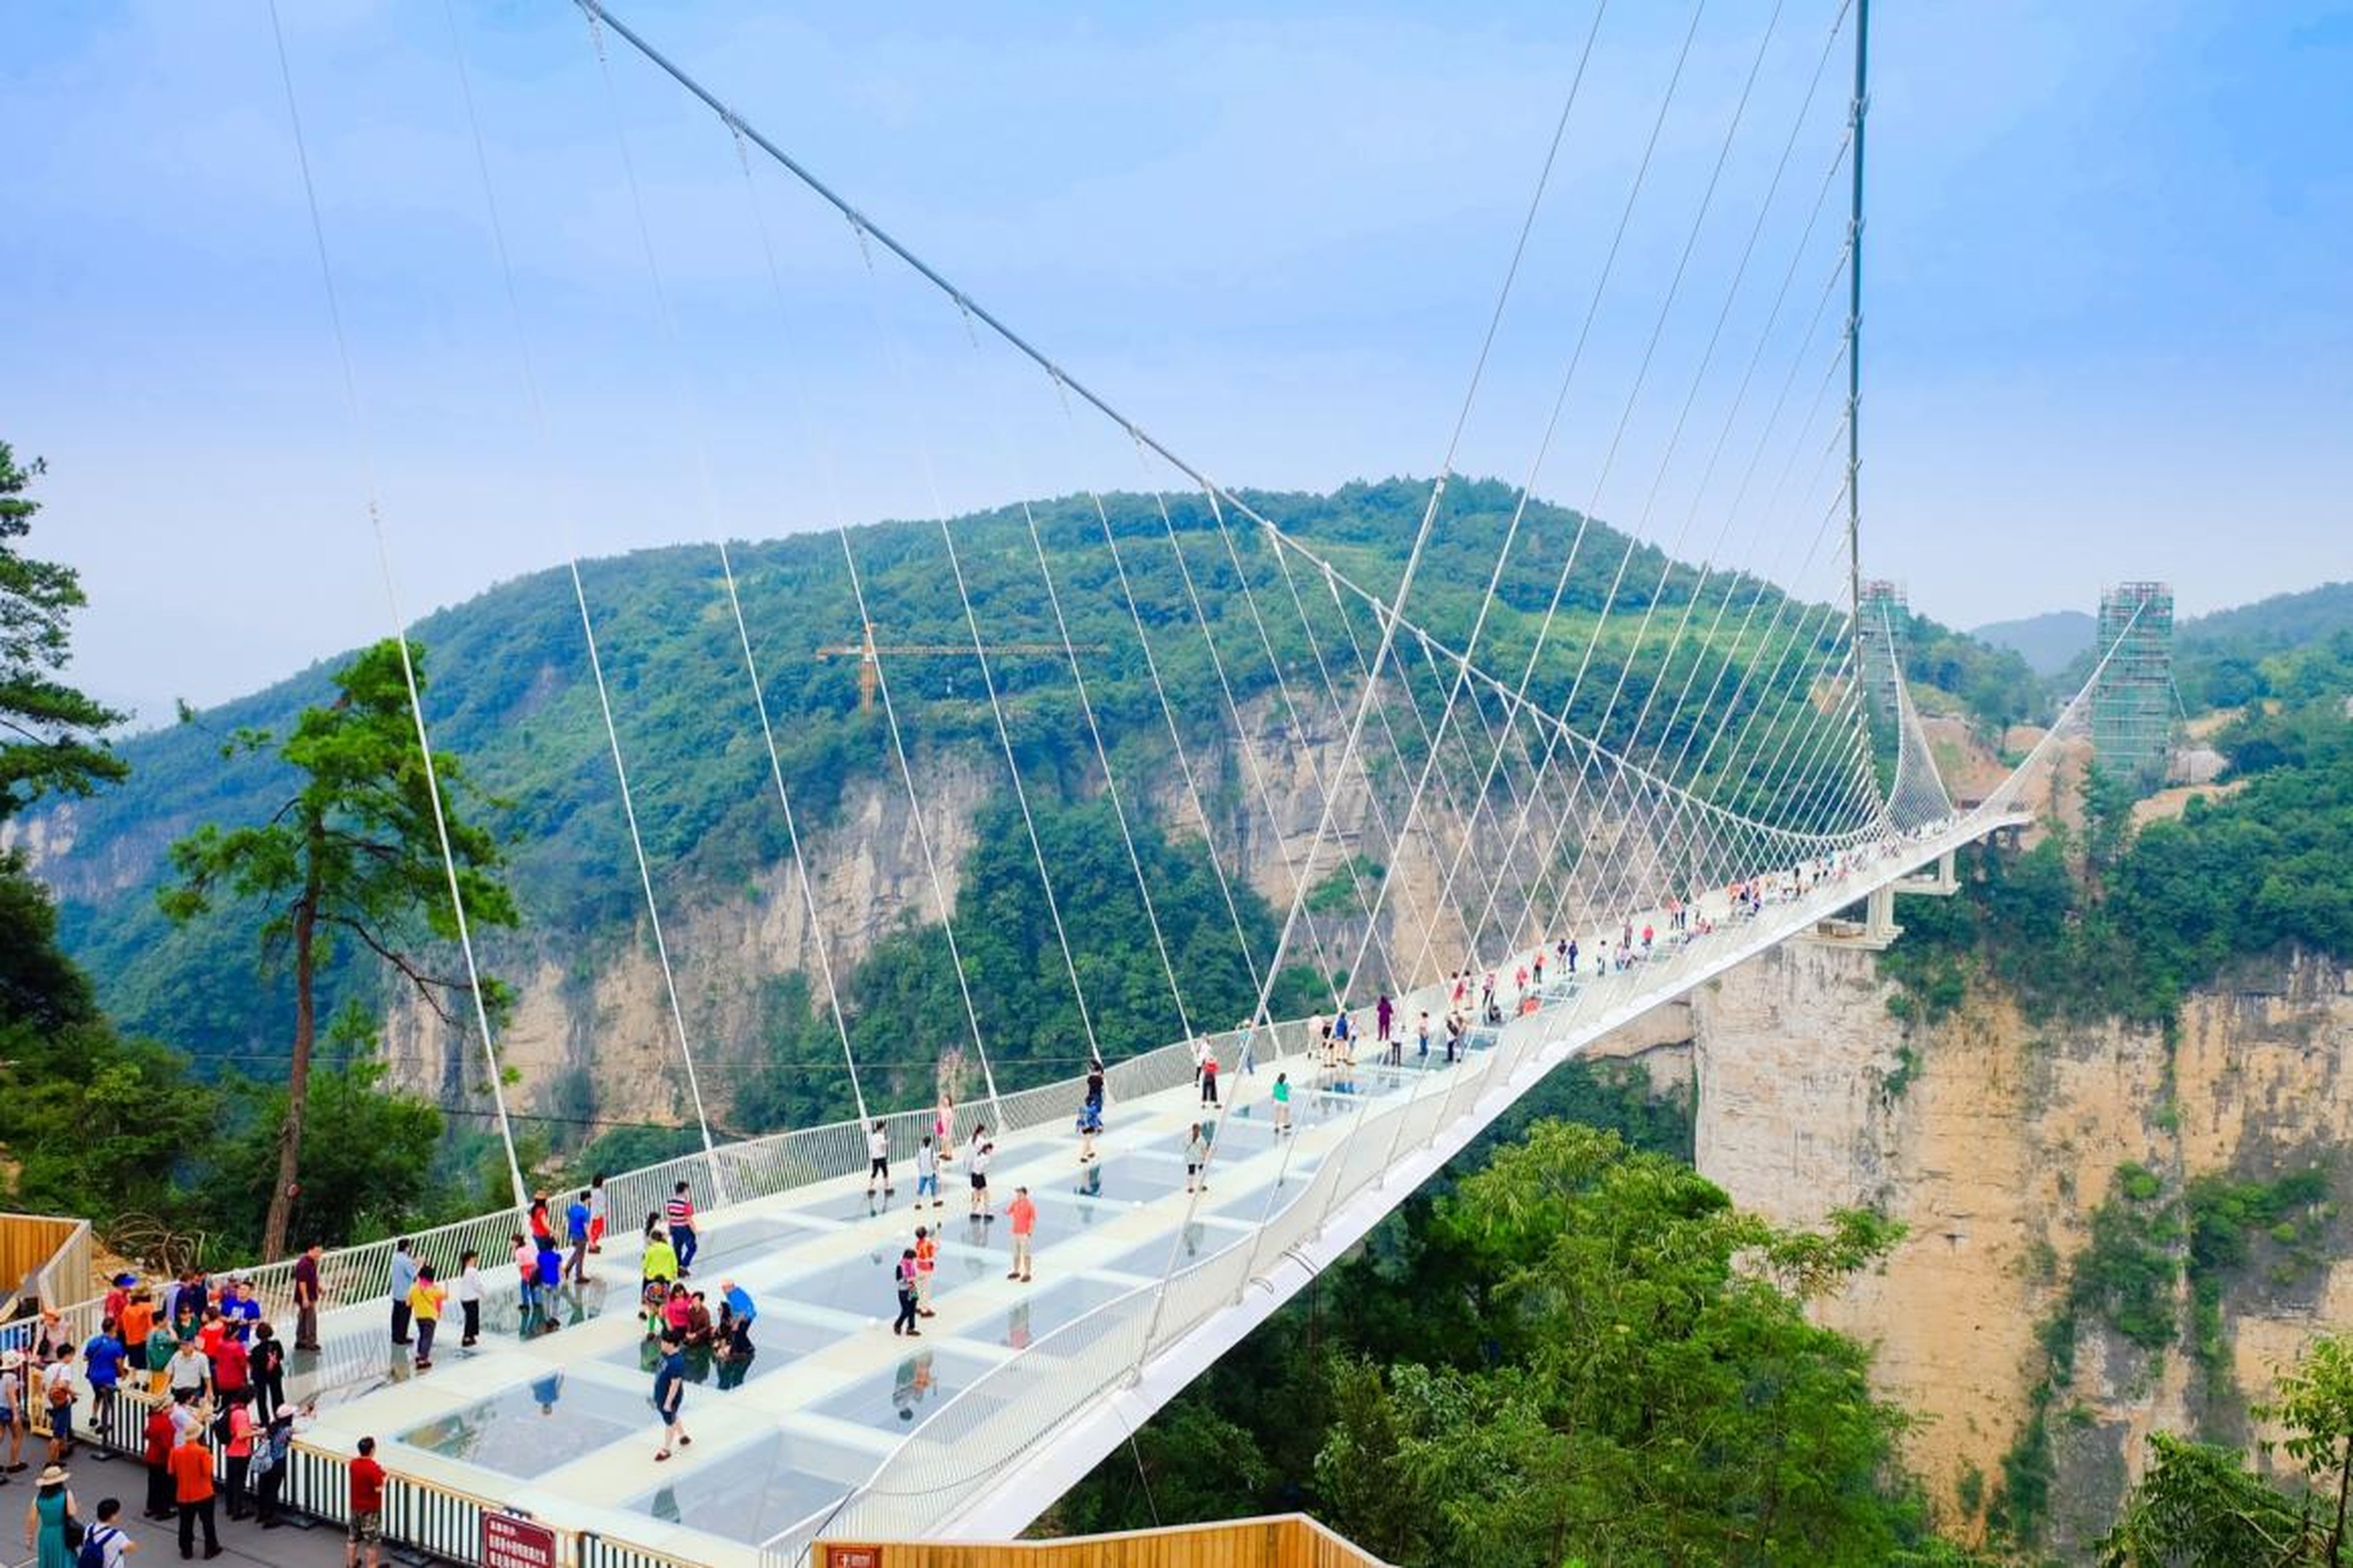 One place I would unequivocally avoid in China is the Zhangjiajie Grand Canyon Glass Bridge. It is the longest and highest glass bridge in the world.